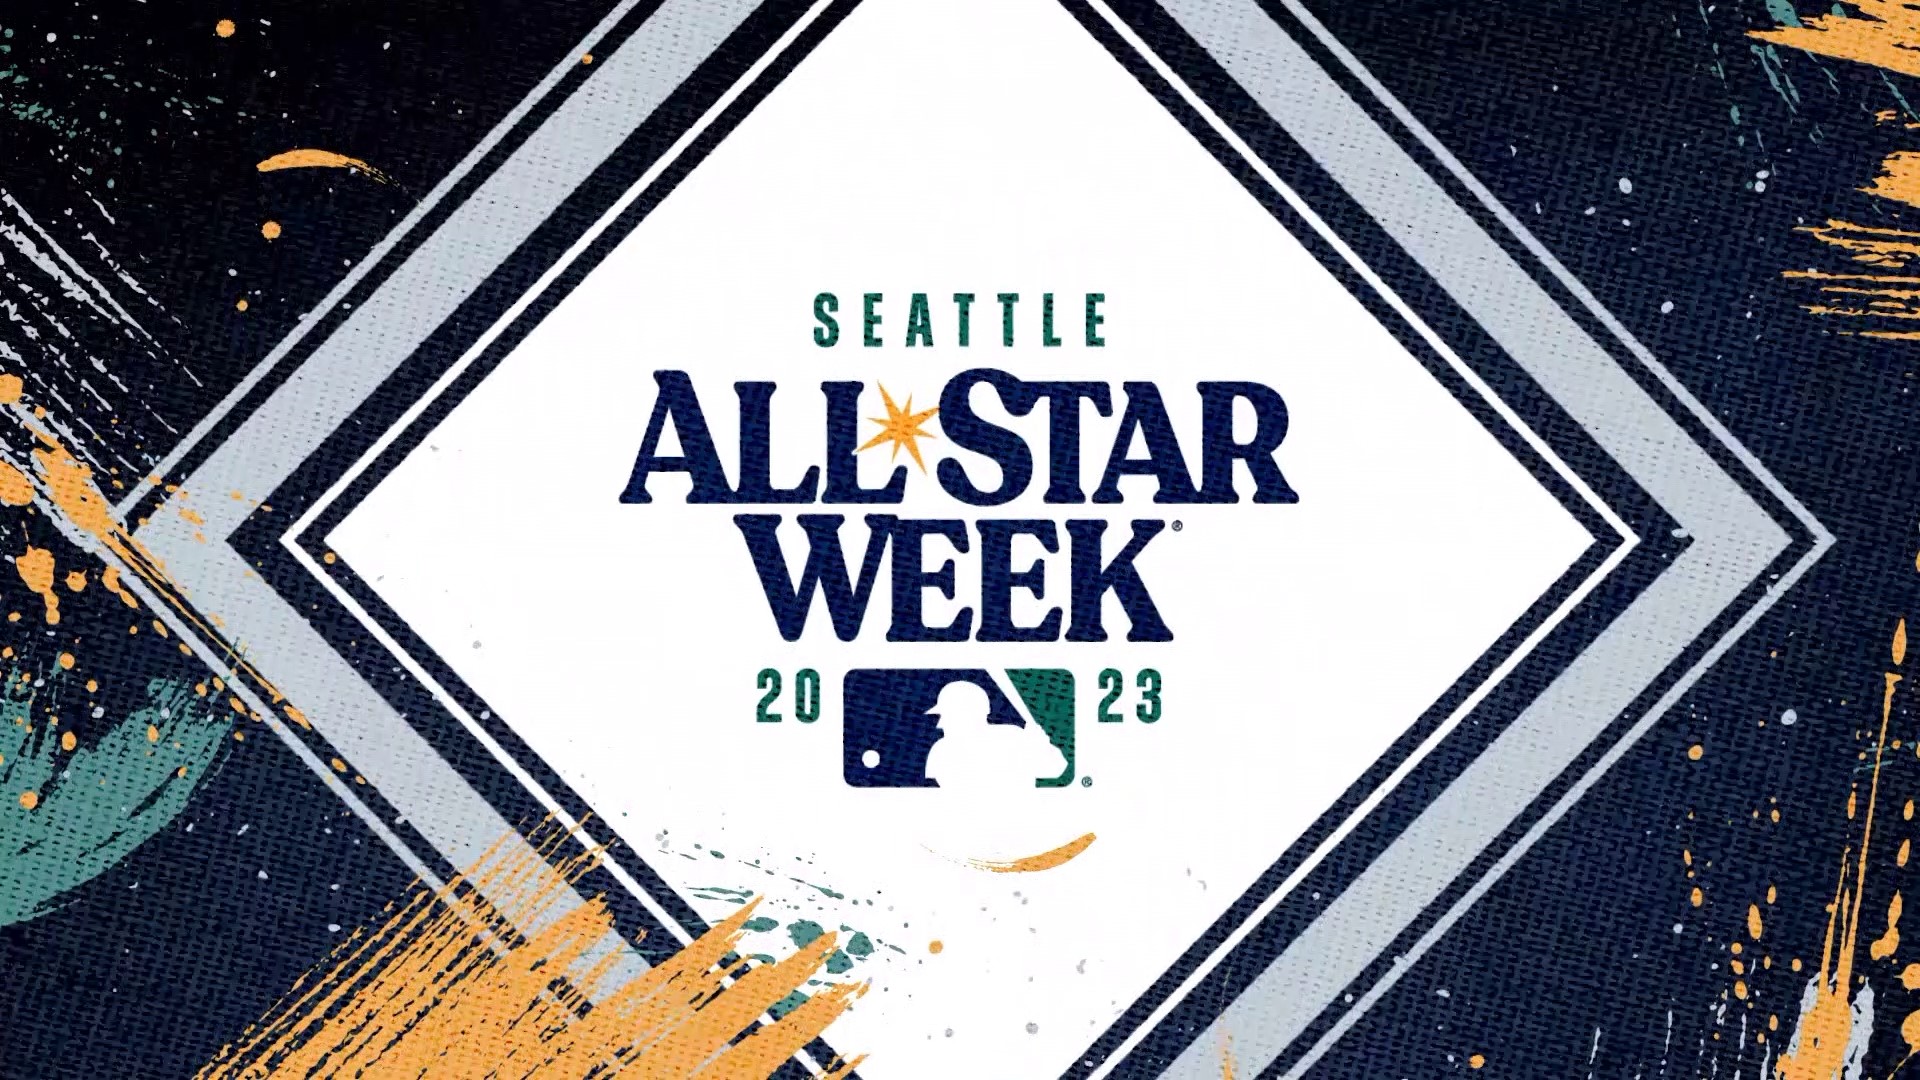 The stage is set for the best baseball players in the world right here in Seattle. Here's a special preview of the 2023 MLB All-Star Week.